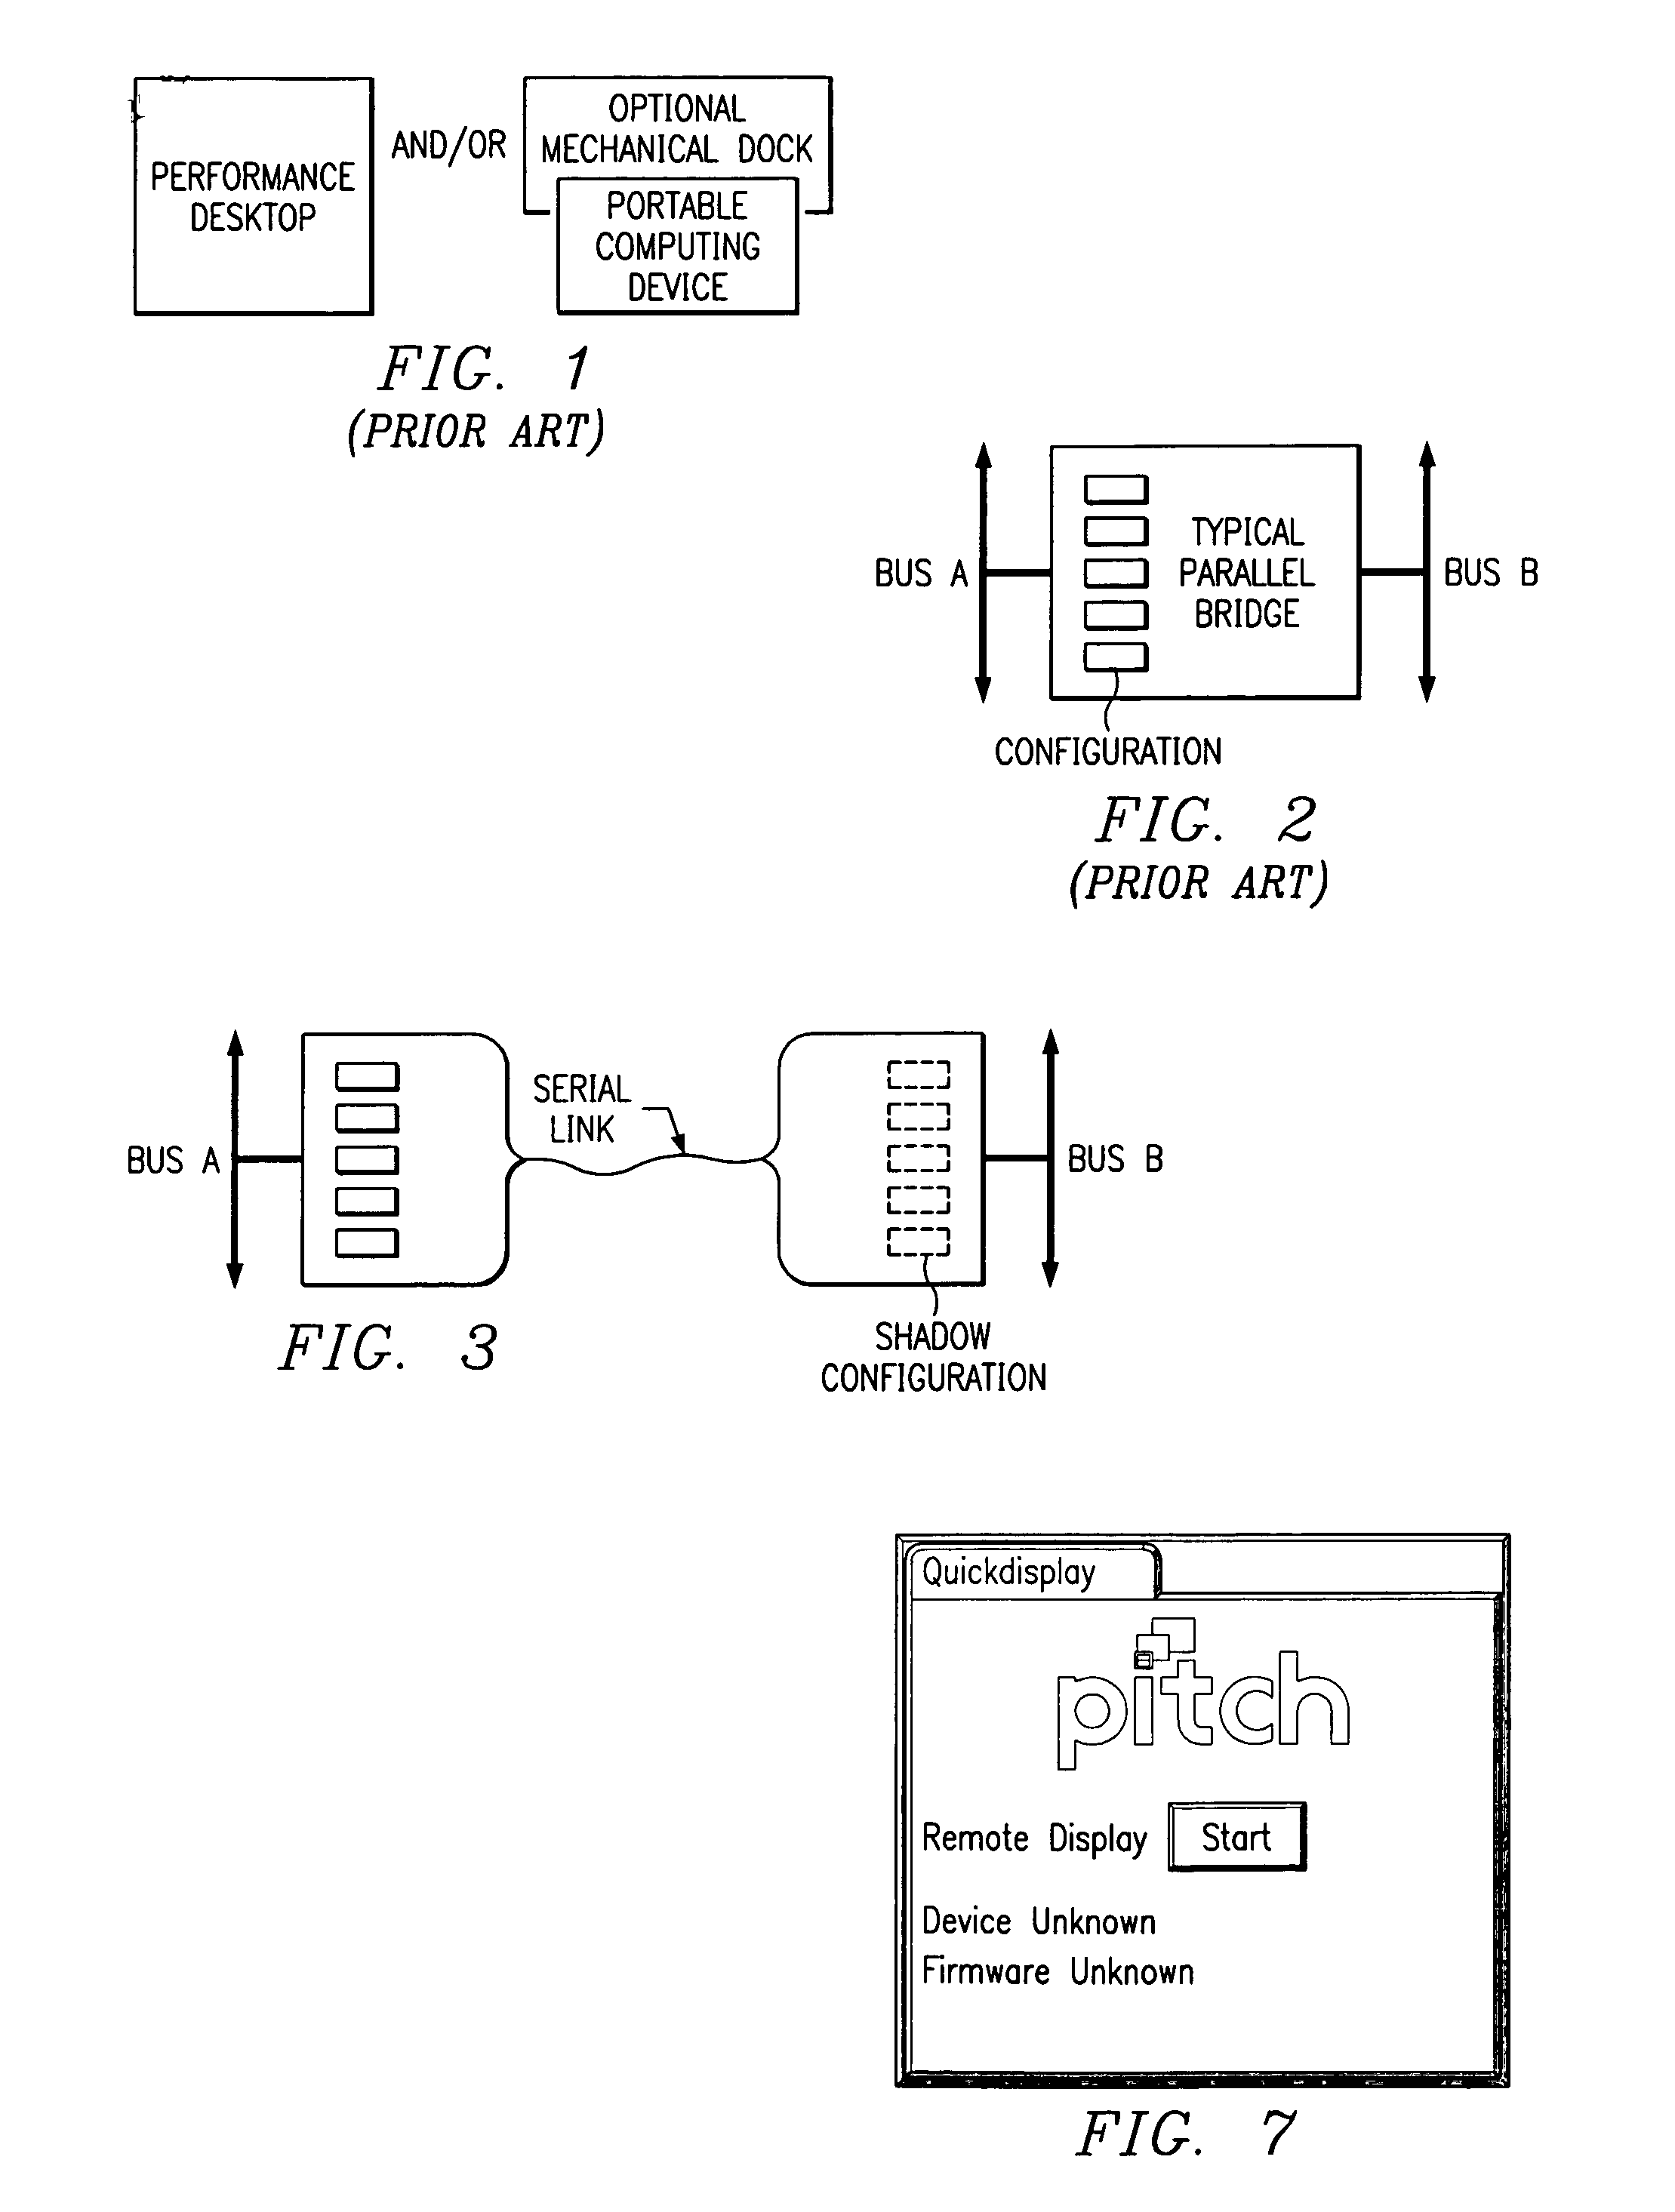 Modular presentation device with network connection for use with PDA's and Smartphones